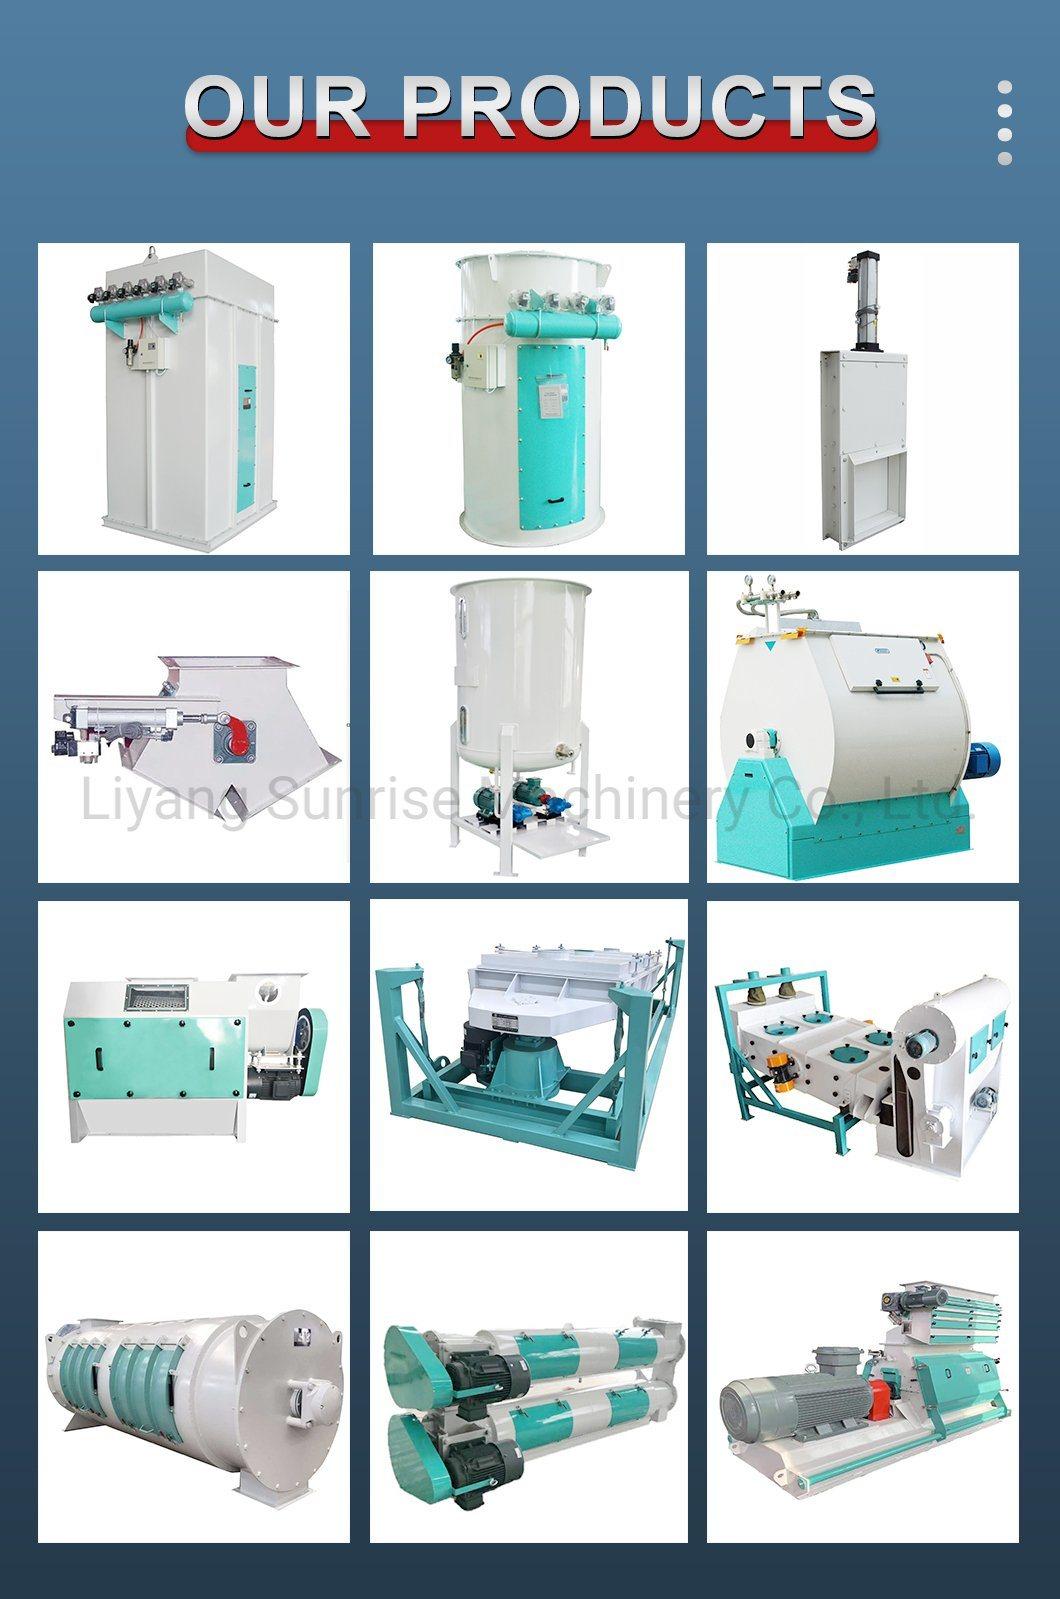 China Supplier Factory Tblf Series Pulse Dust Collector for Feed Processing Machinery for Sale